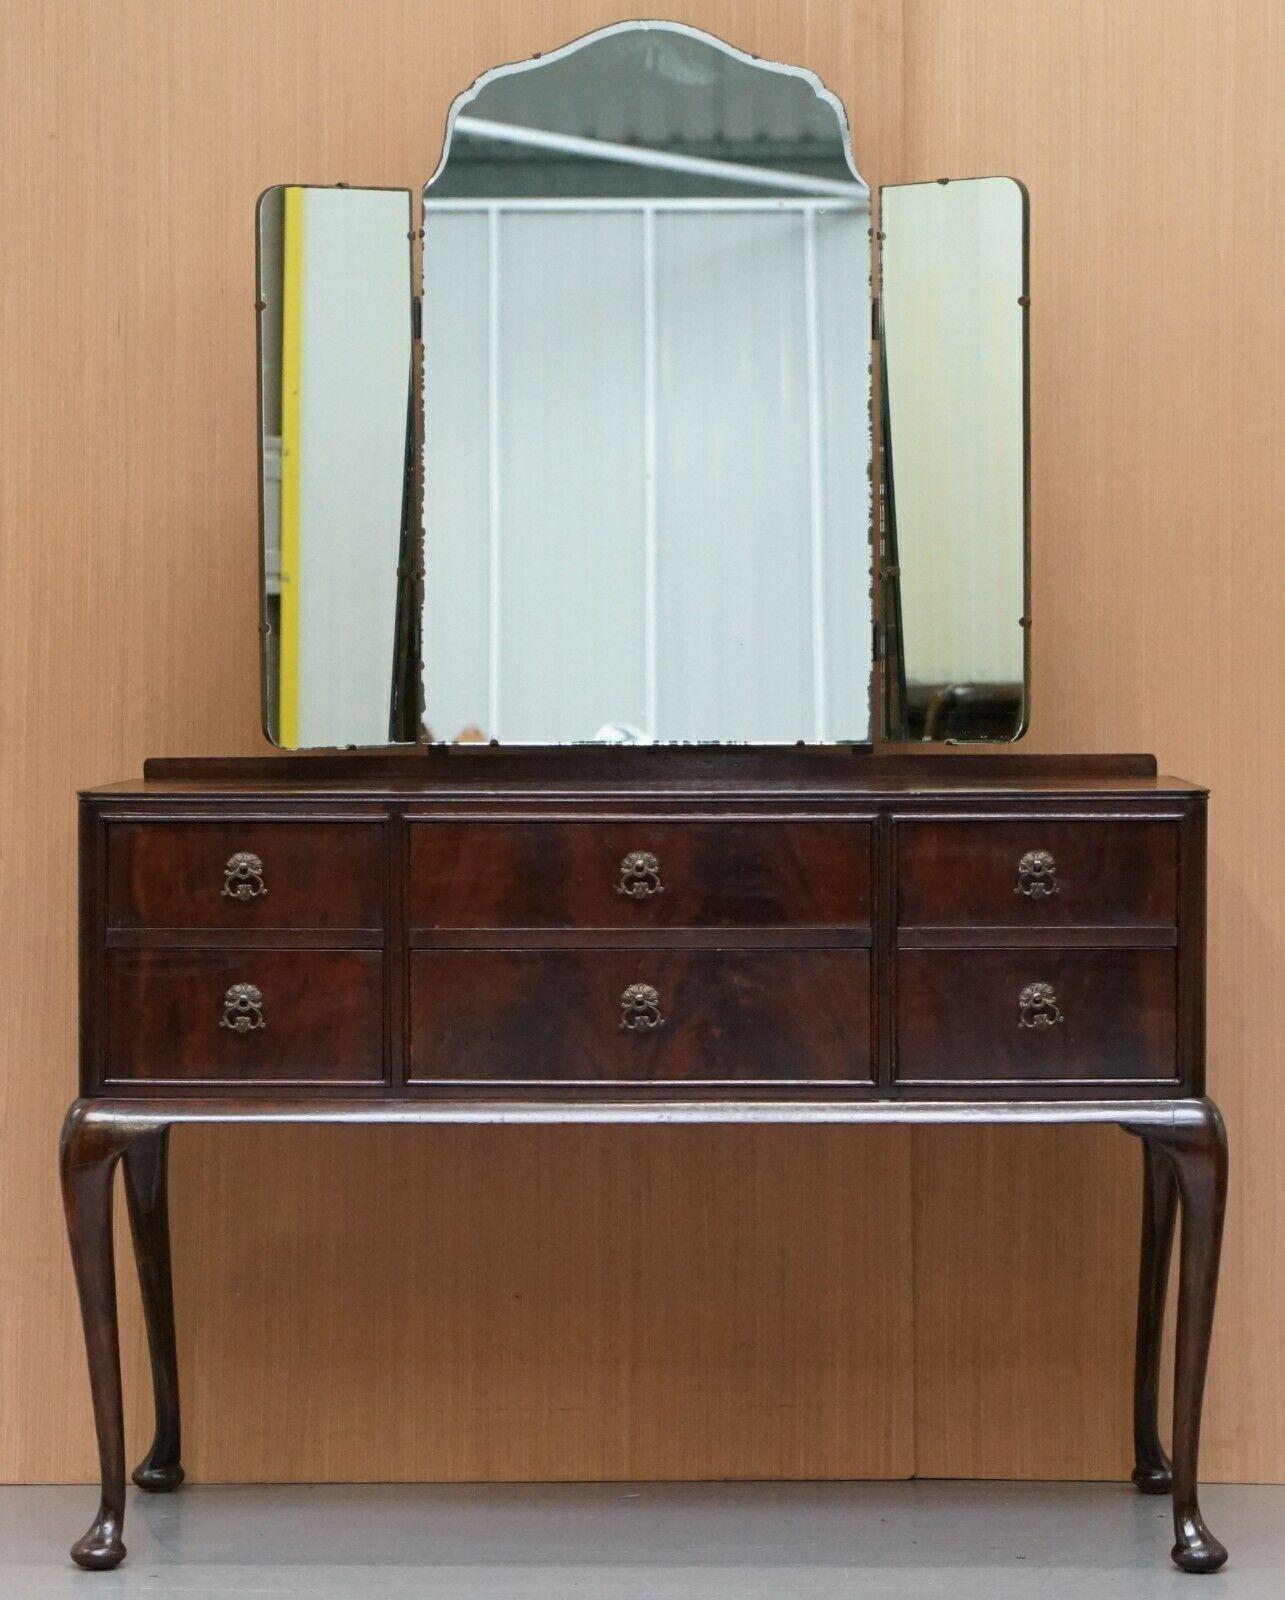 We are delighted to offer for sale this stunning Beithcraft furniture mahogany dressing table with tri fold mirror

A very good looking well made and decorative piece of vintage furniture, the tri fold mirrors are tapered around the edges to pull